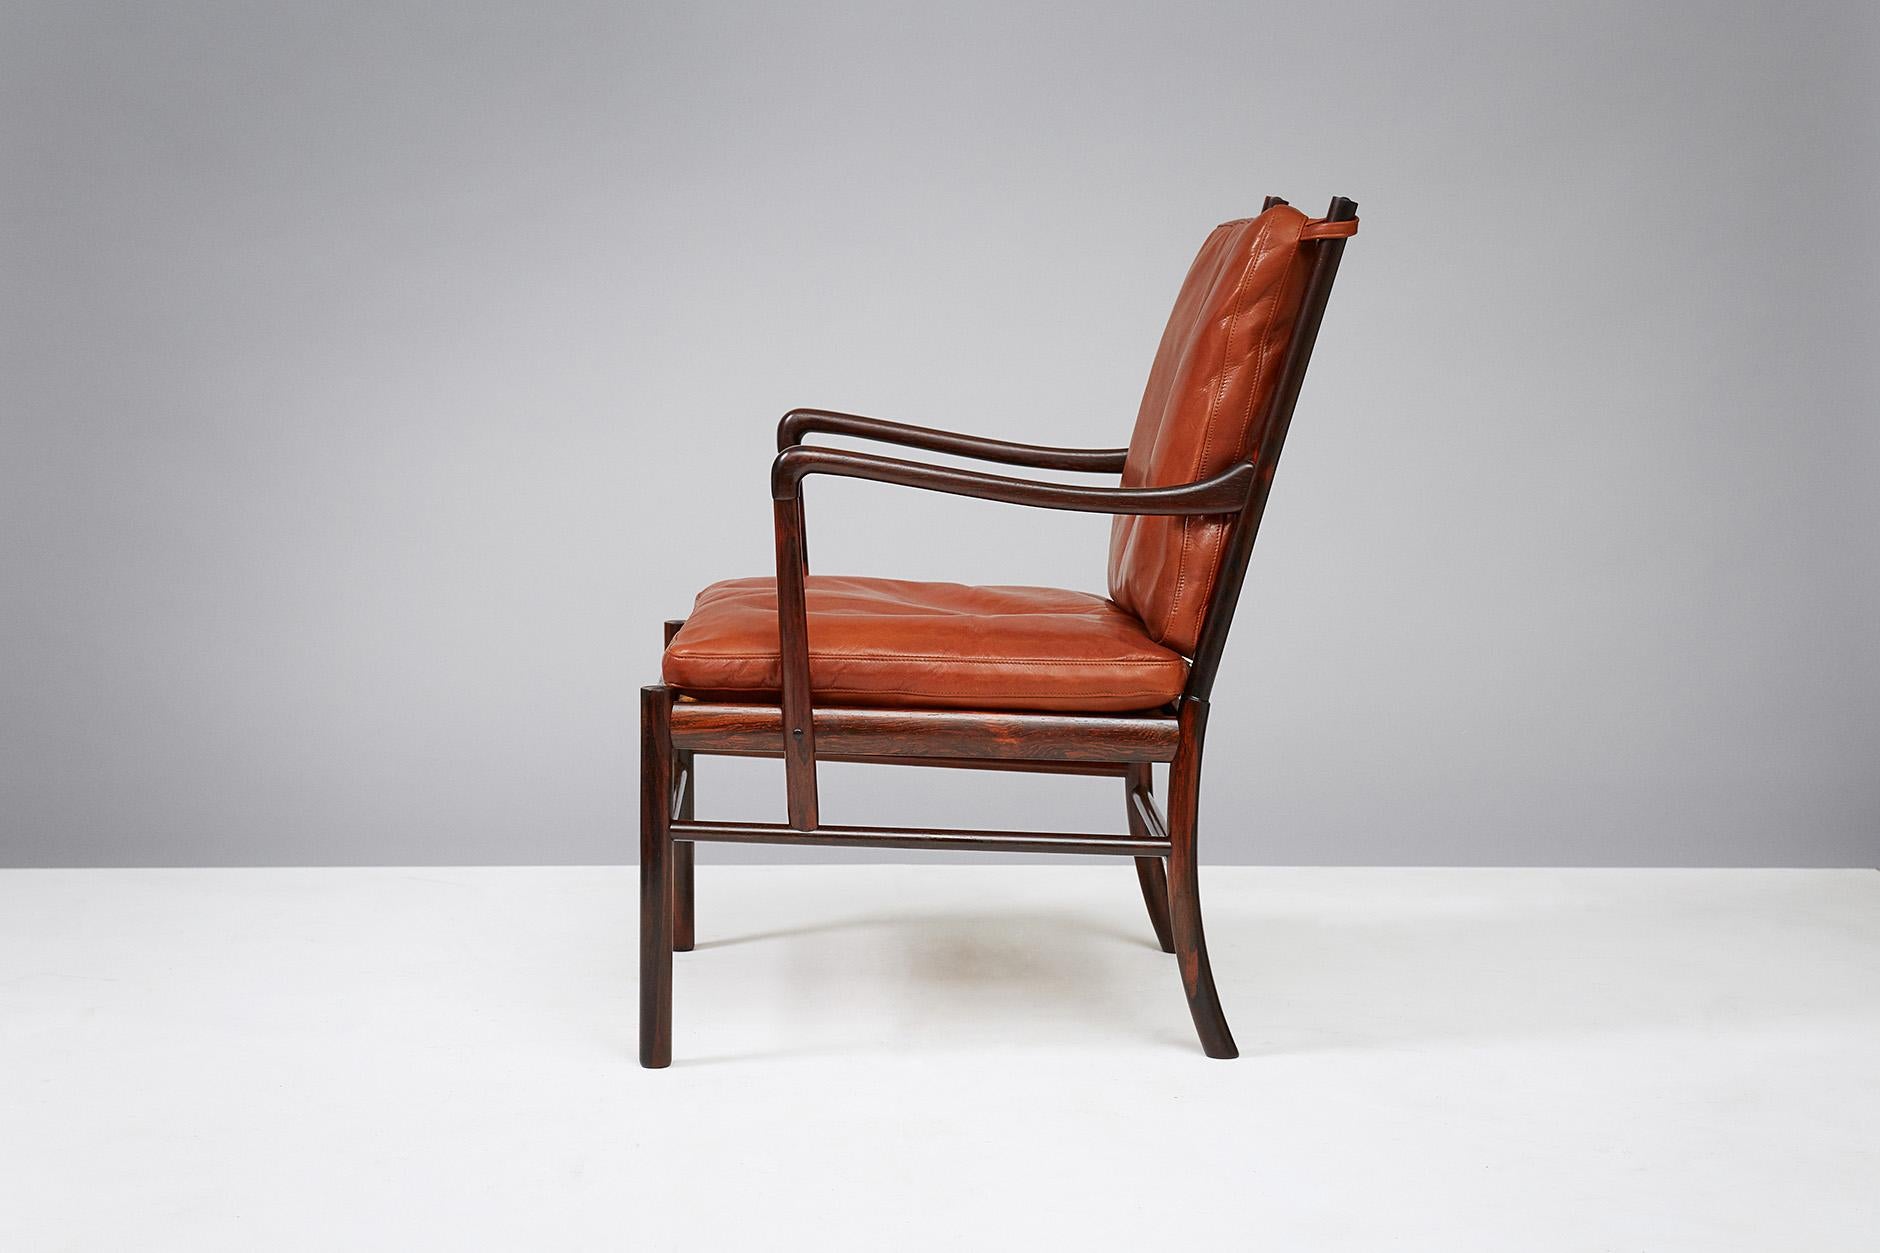 Ole Wanscher

PJ-149 Colonial chairs, 1949.

These examples made from Brazilian rosewood with woven rattan cane seats. Produced by Poul Jeppesen, Denmark, circa 1950s. Cognac brown aniline leather seat cushions with loose feather filling.